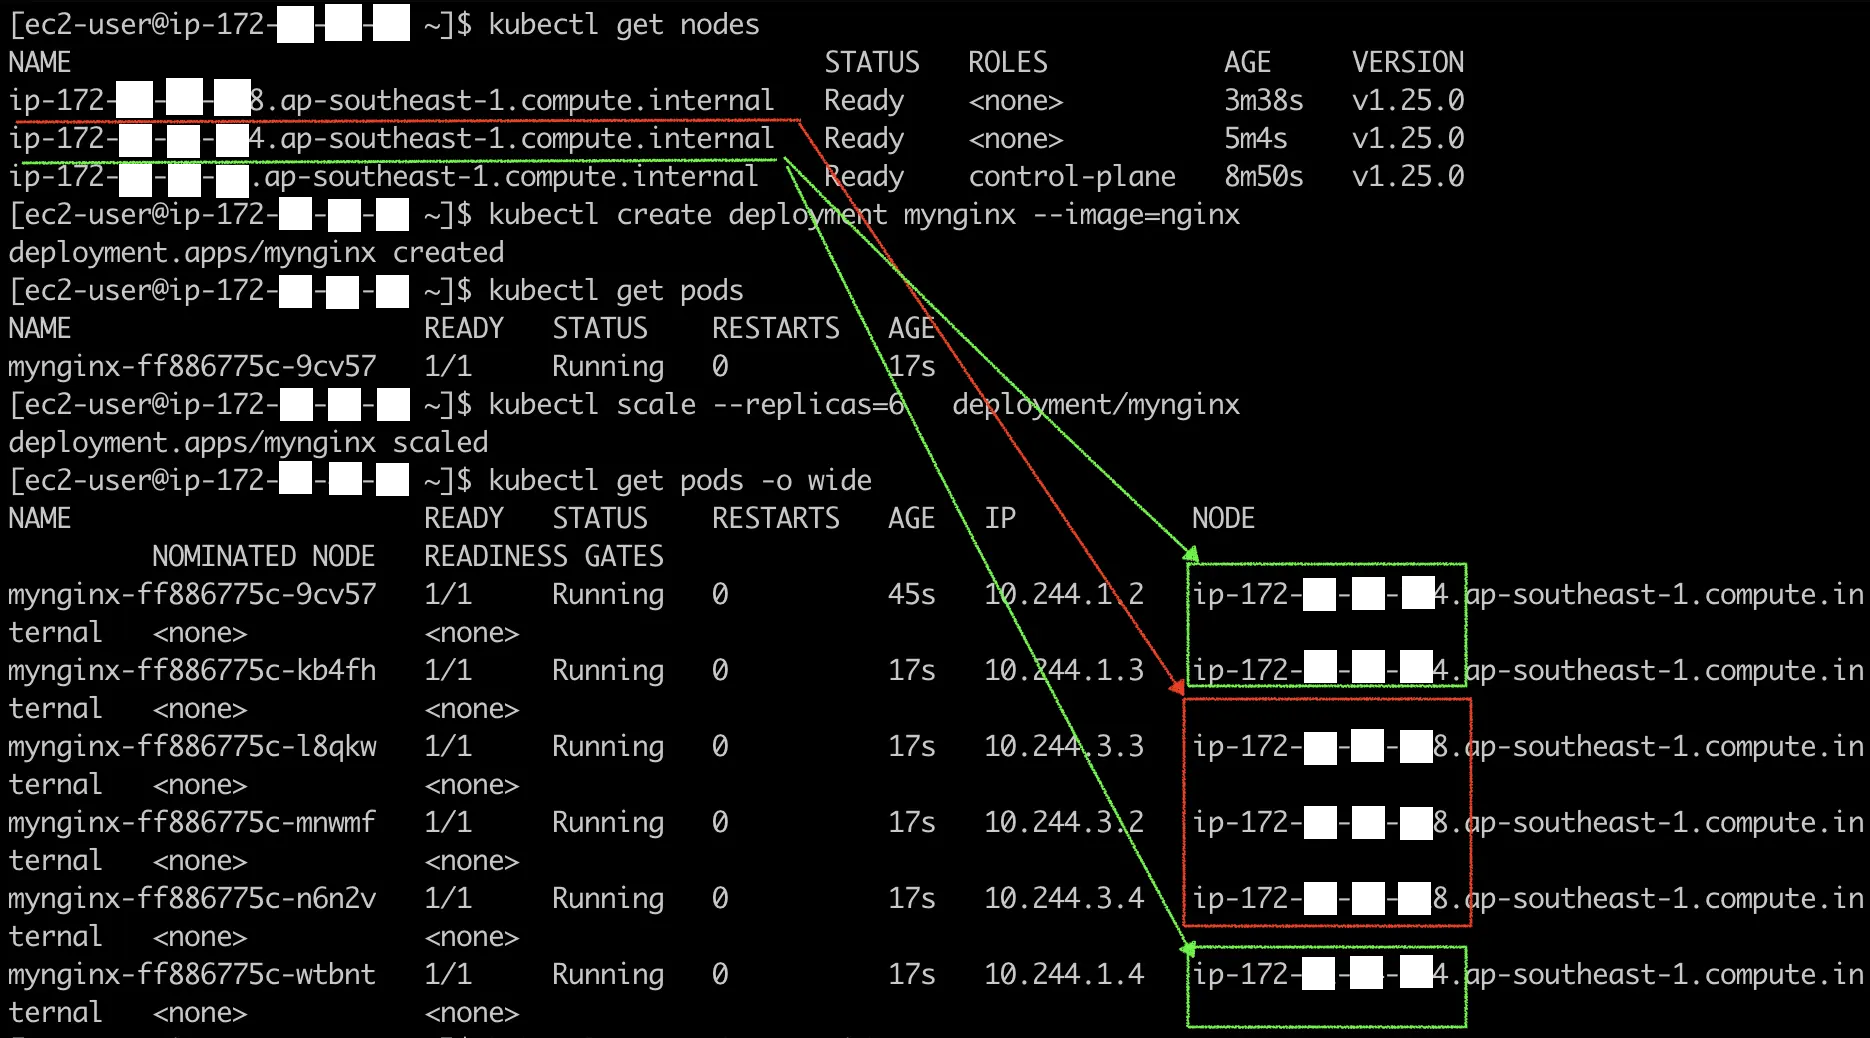 Results of the kubectl get nodes and kubectl get pods. The two worker nodes are highlighted, pointing to their coinciding output from the command “kubectl get pods -o wide”.